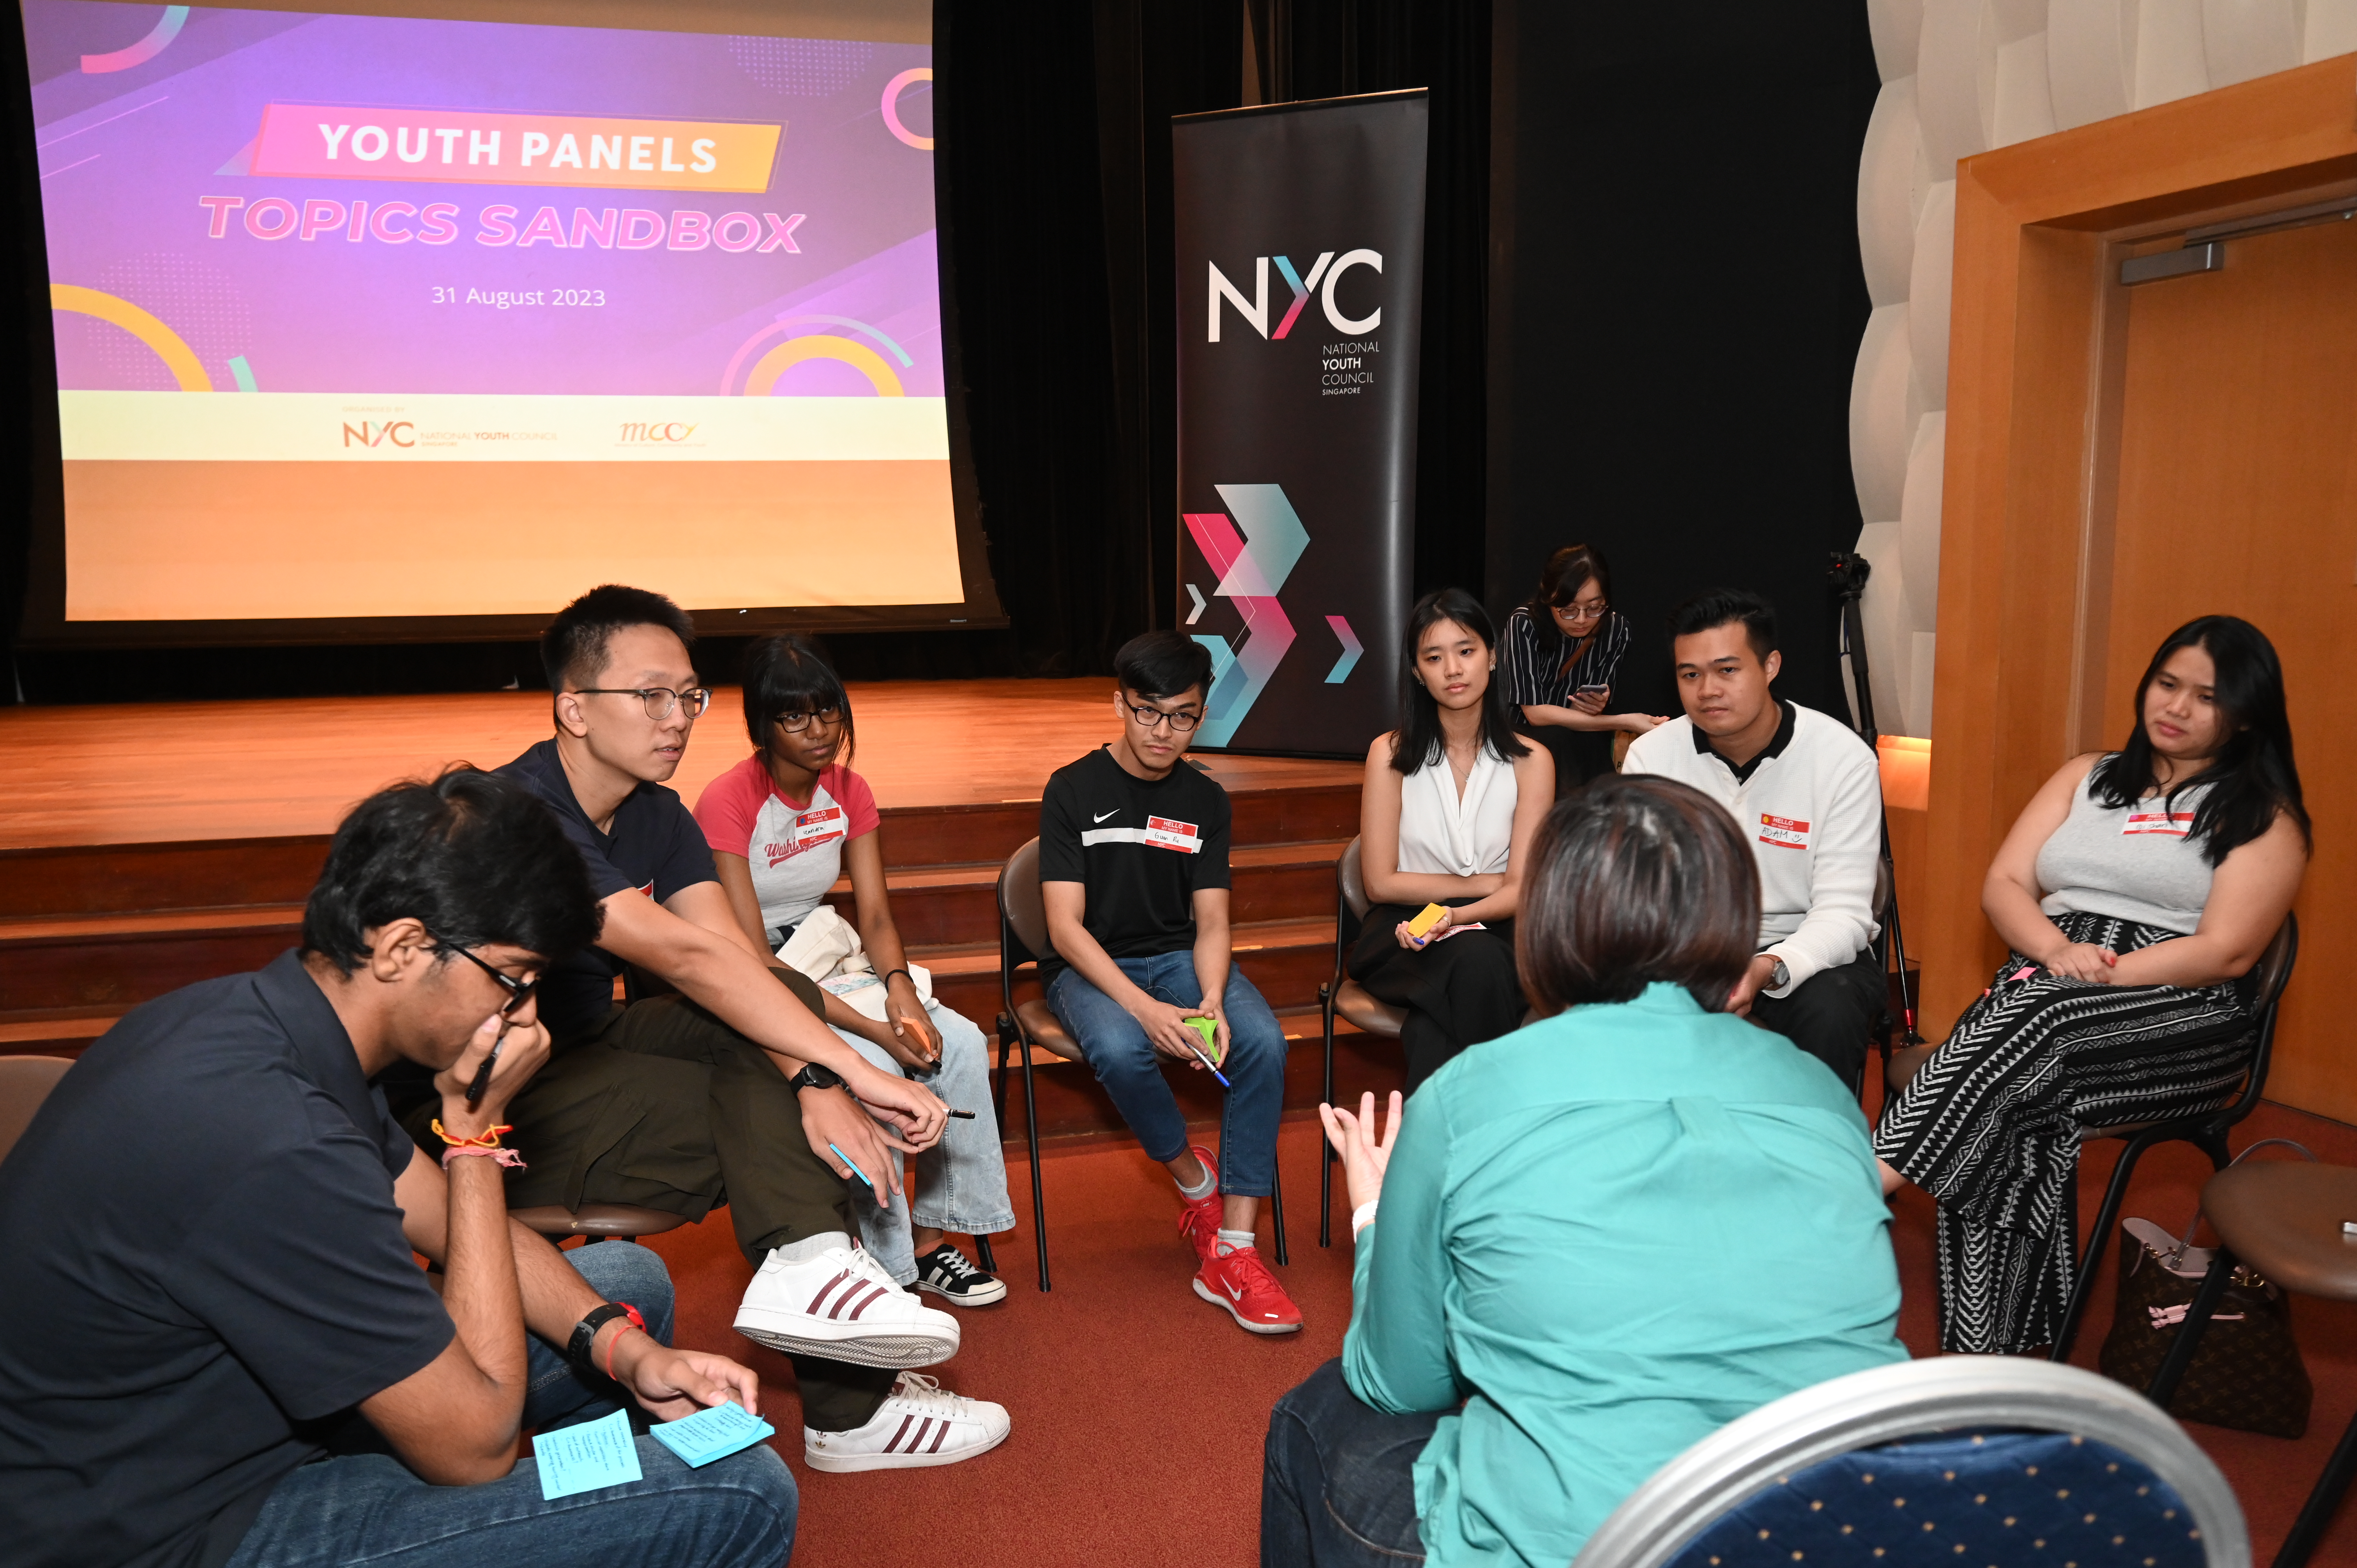 national-youth-council-nyc-singapore-youth-panels-participants